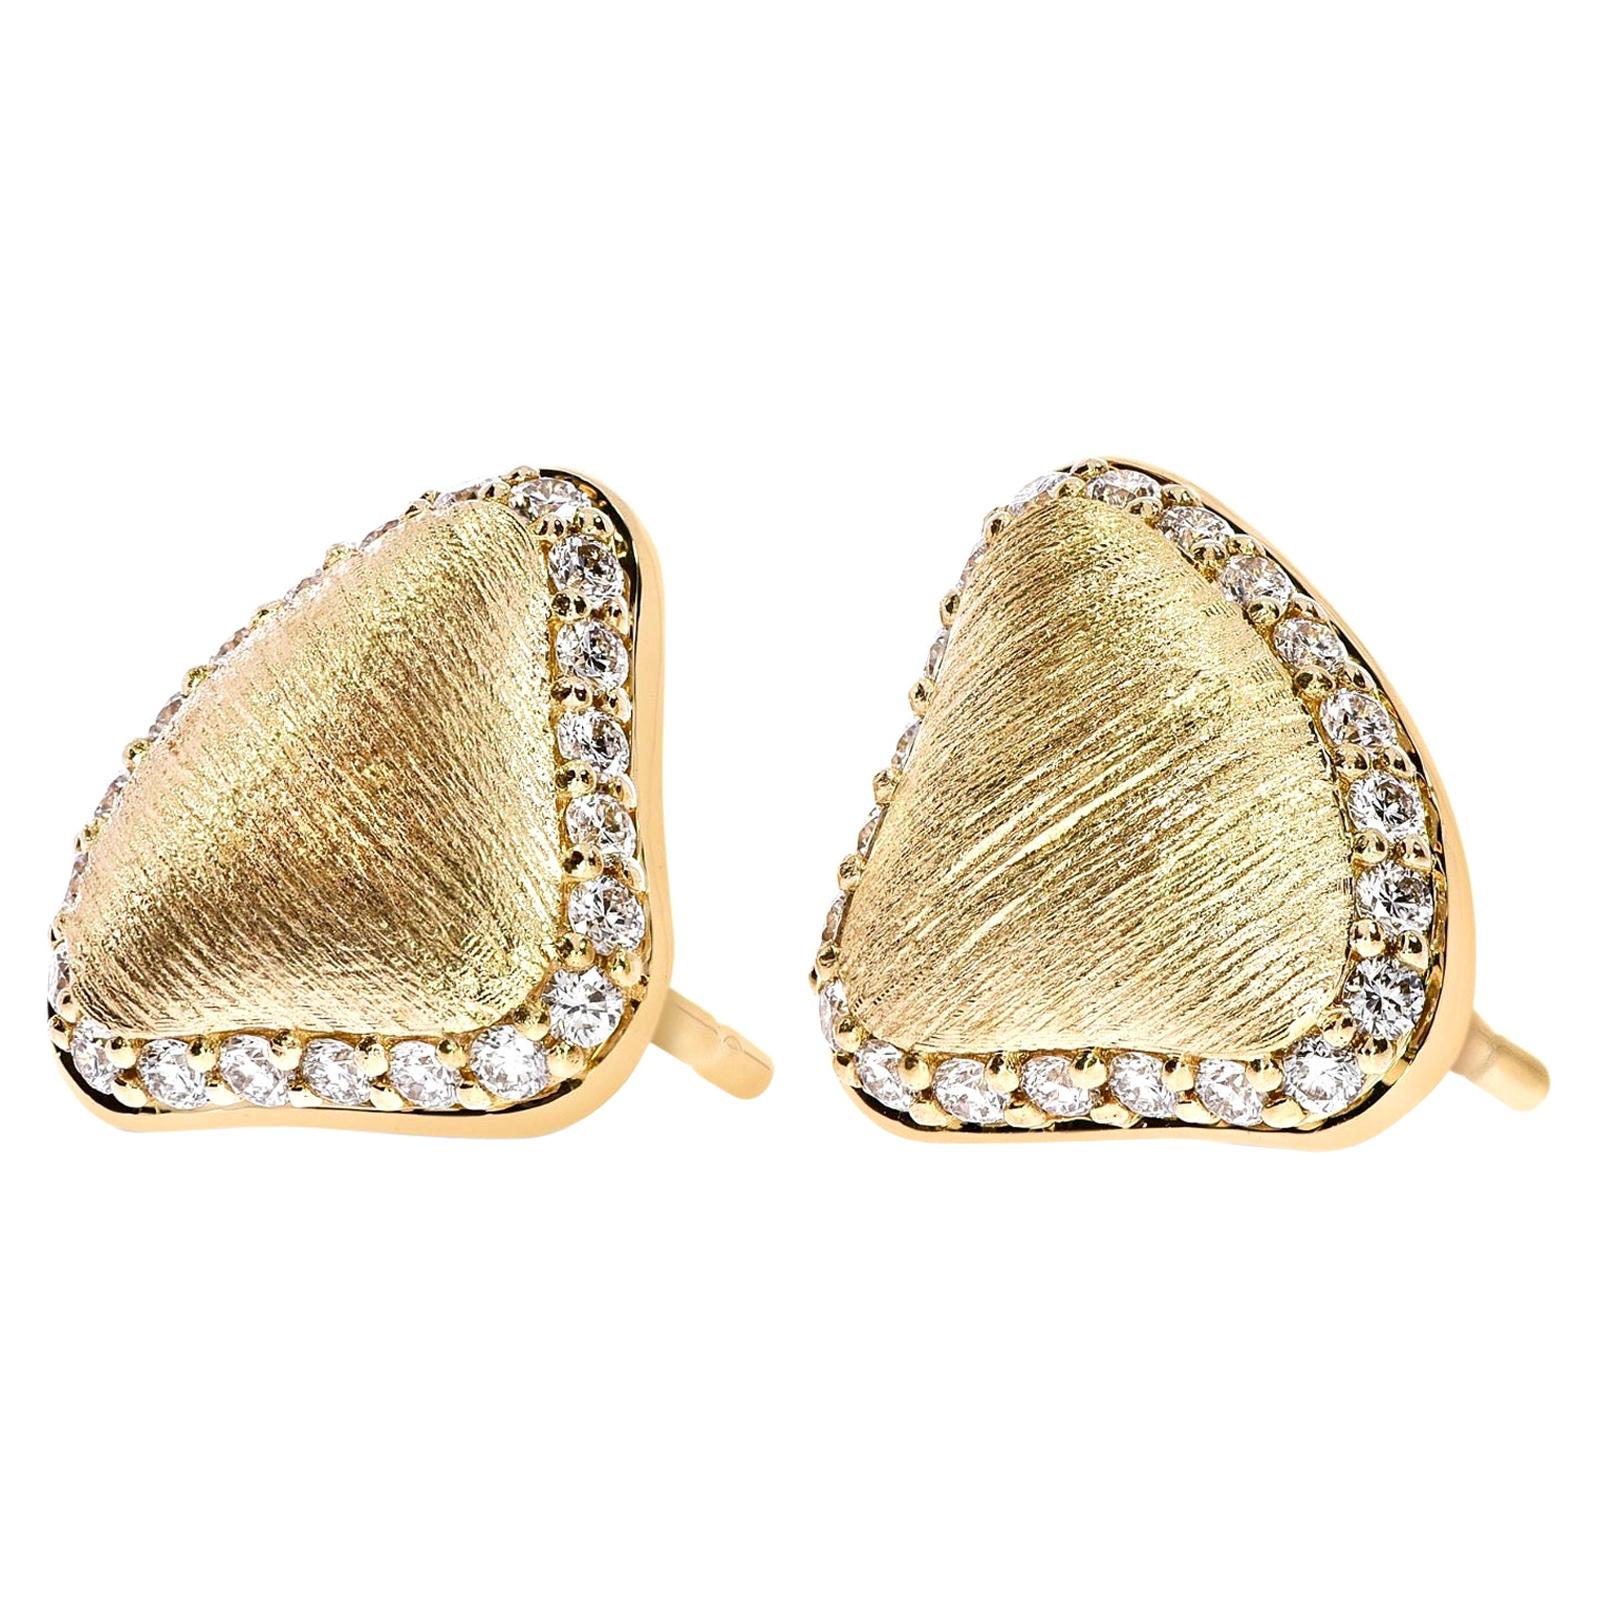 This pair of studs are hand textured to give you that brushed detail and it's shown here in 18K yellow gold and the edges are expertly lined with 0.40cts of G VS white brilliant cut diamonds. The stoppers are set in an easy wear cap.